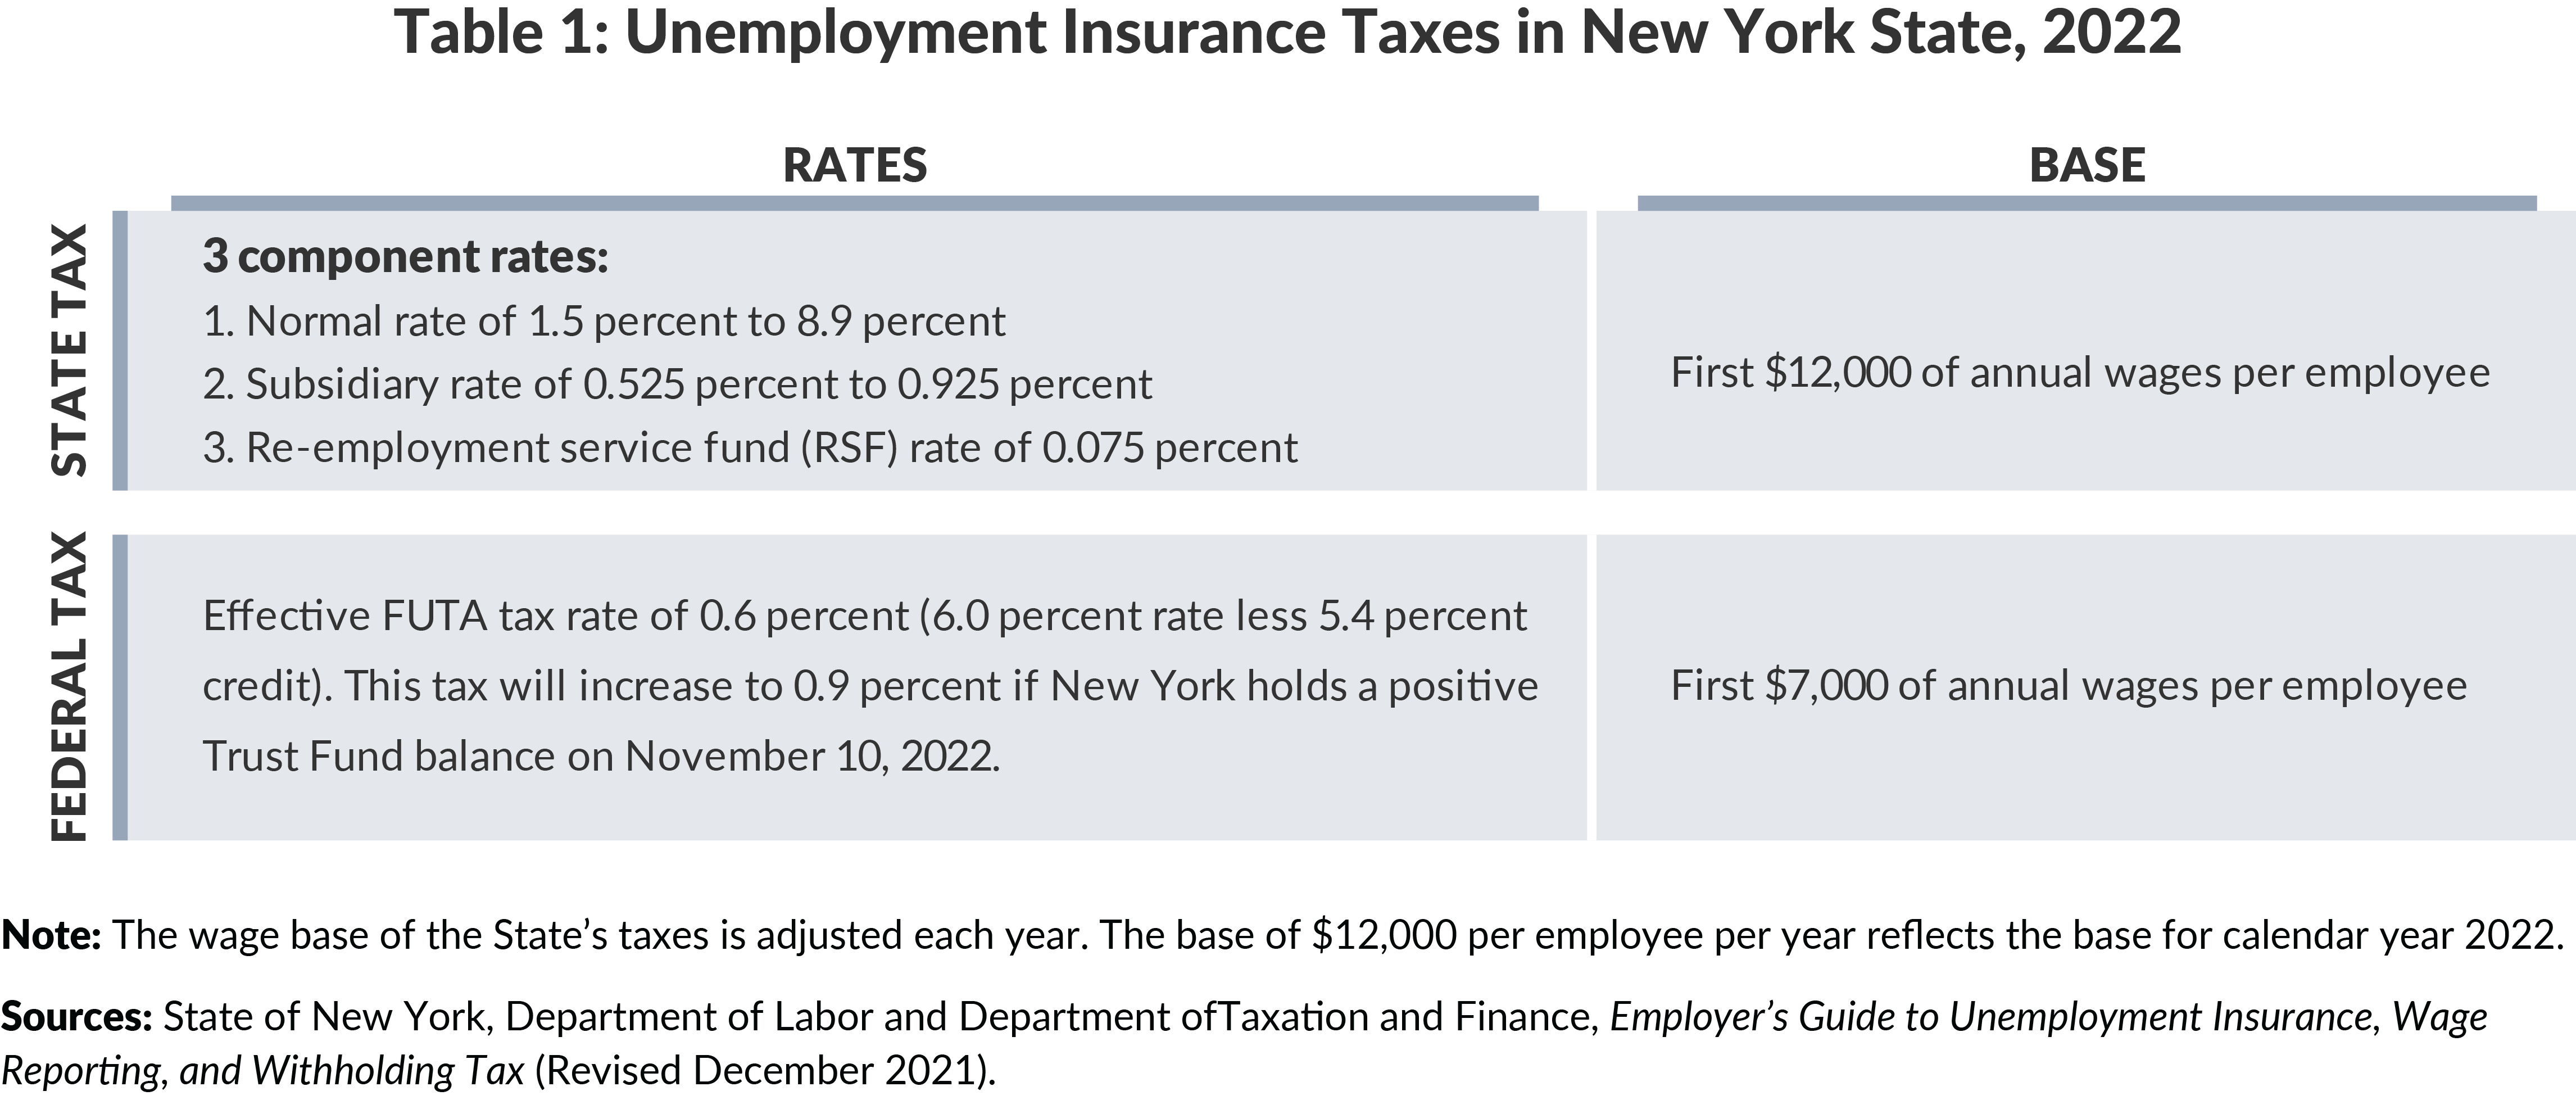 Table 1: Unemployment Insurance Taxes in New York State, 2022